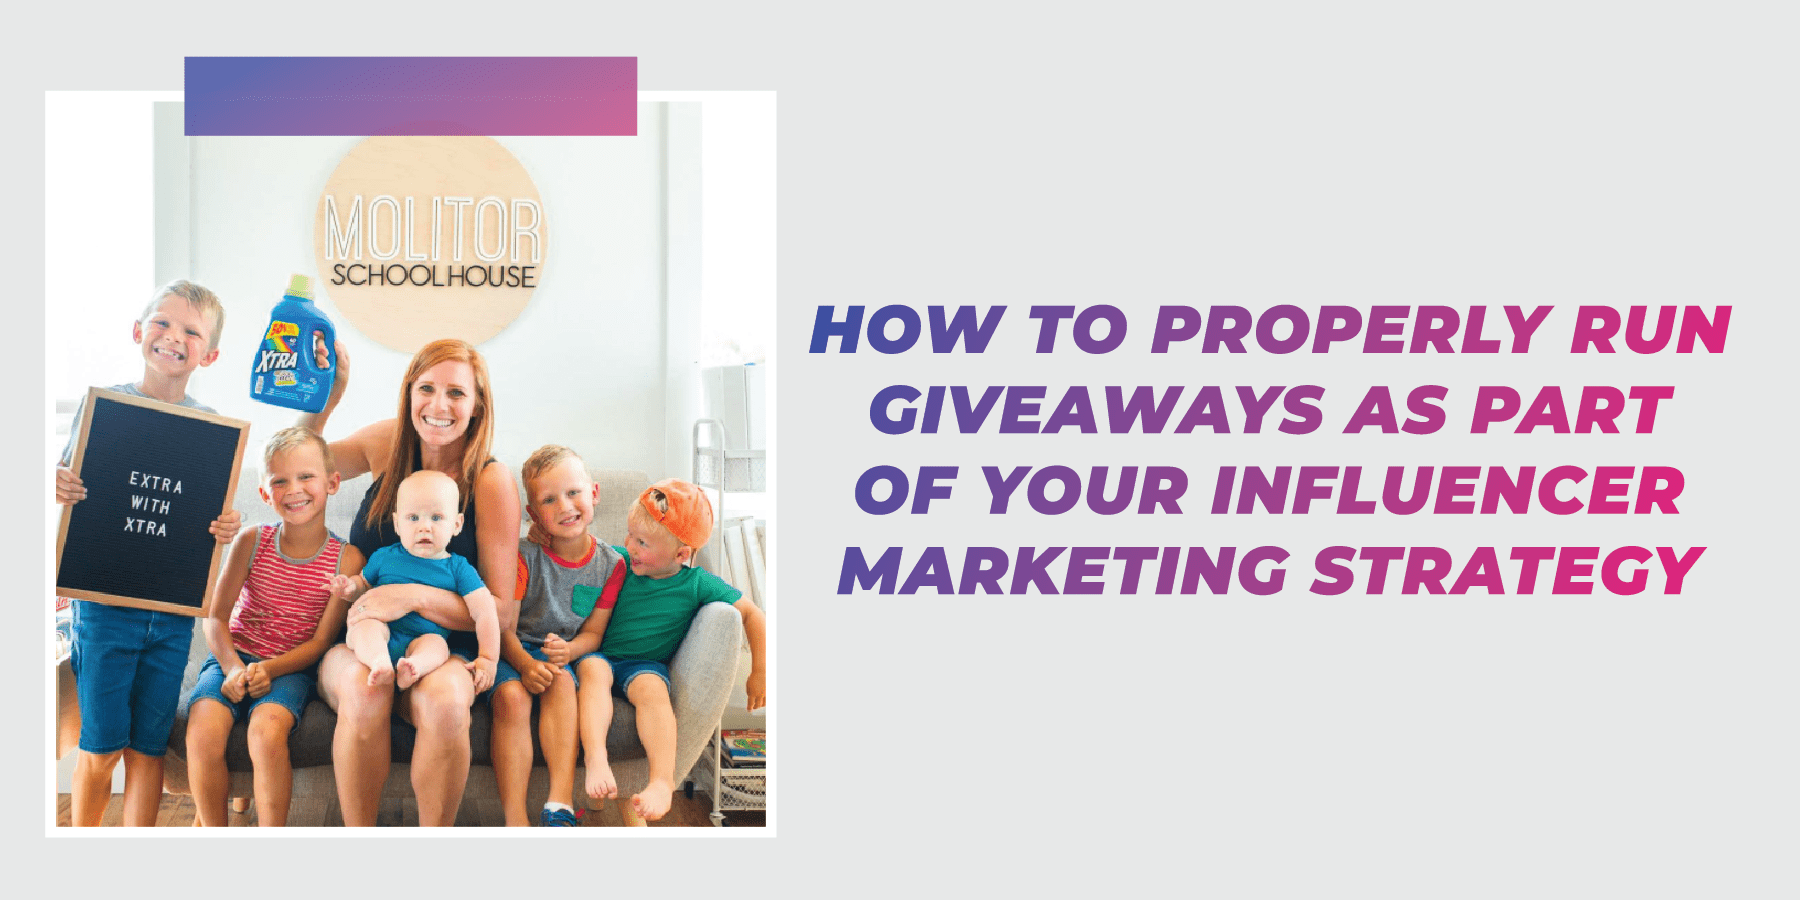 How to Properly Run Giveaways as Part of your Influencer Marketing Strategy